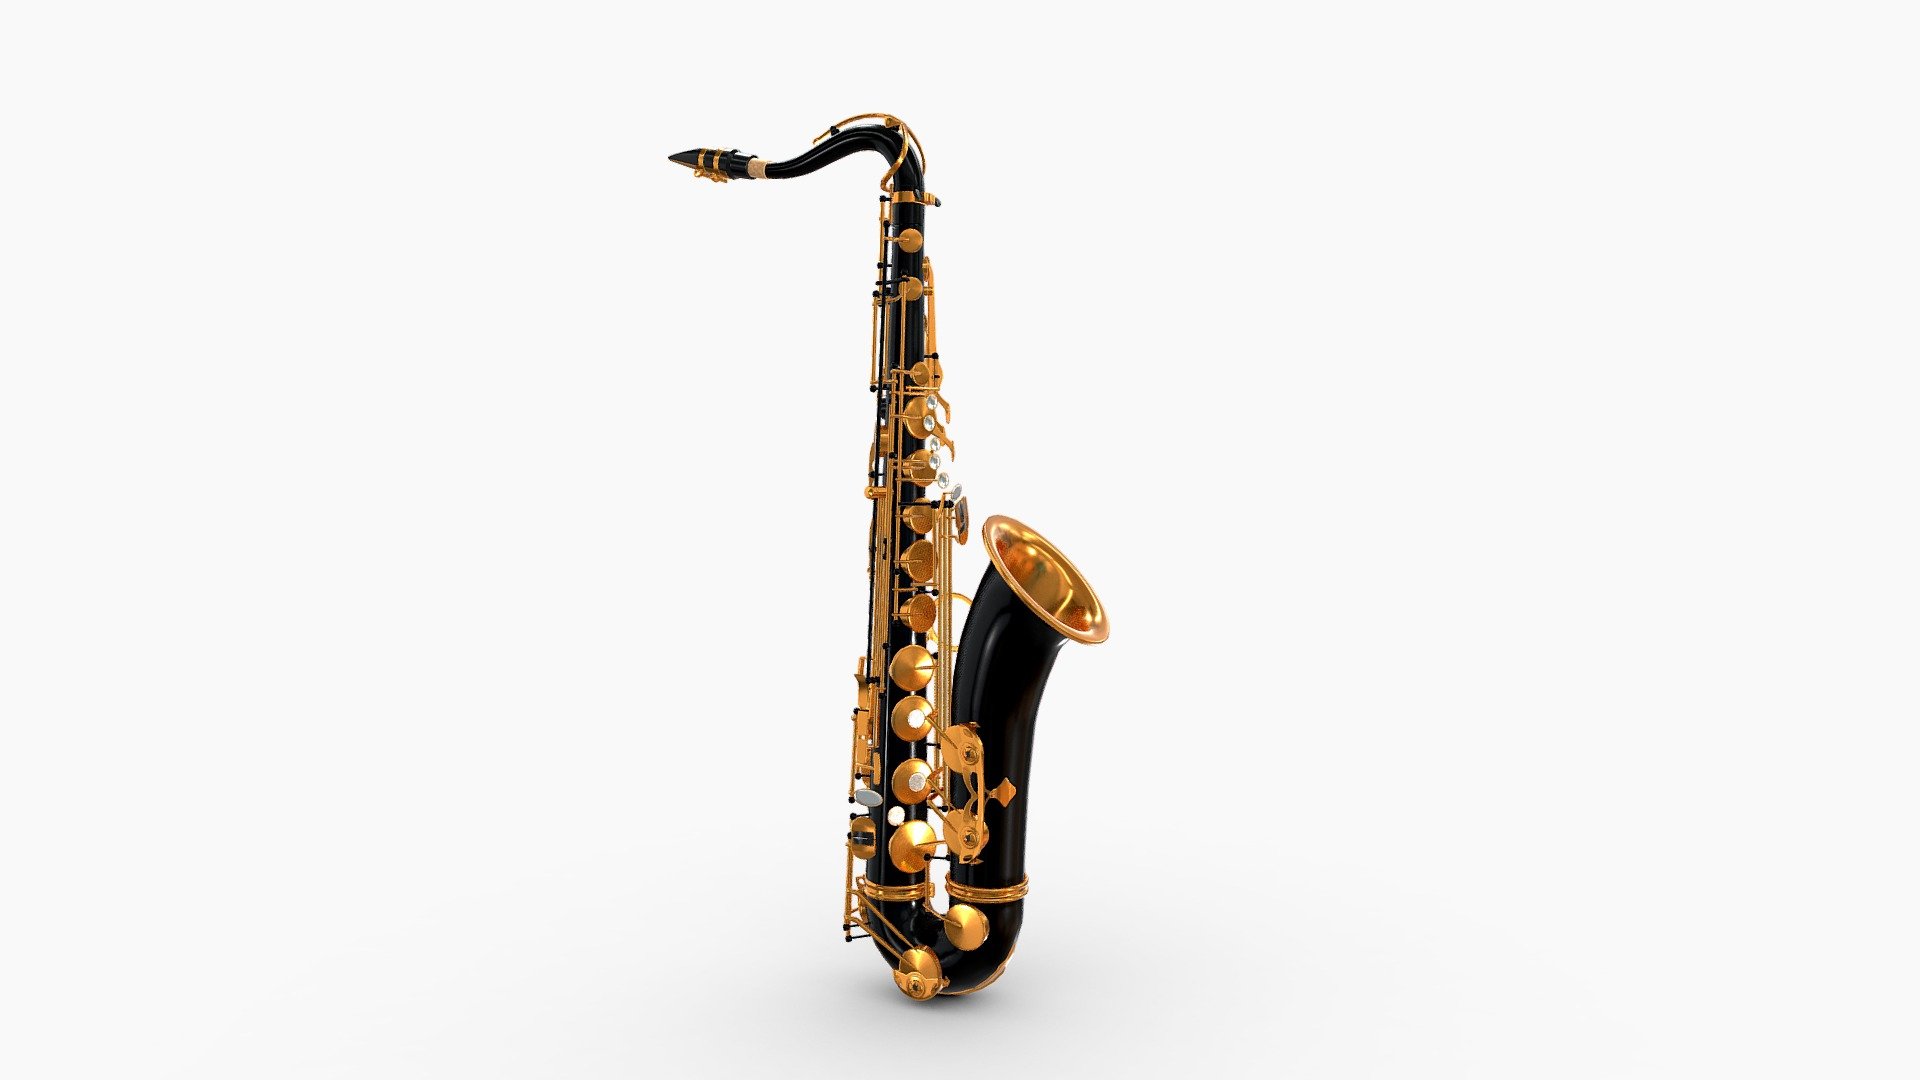 Saxophone is a reed wind instrument.

This musical instrument can be suitable for any musical game in which you can use this asset.

MODEL




Polys: 19150

Verts: 19048

TEXTURES




Albedo

Normal

Metallic

Roughness

AmbientOcclusion

(PBR workflow)

4096x4096 high resolution texture sets are made according to the working process PBR 3d model